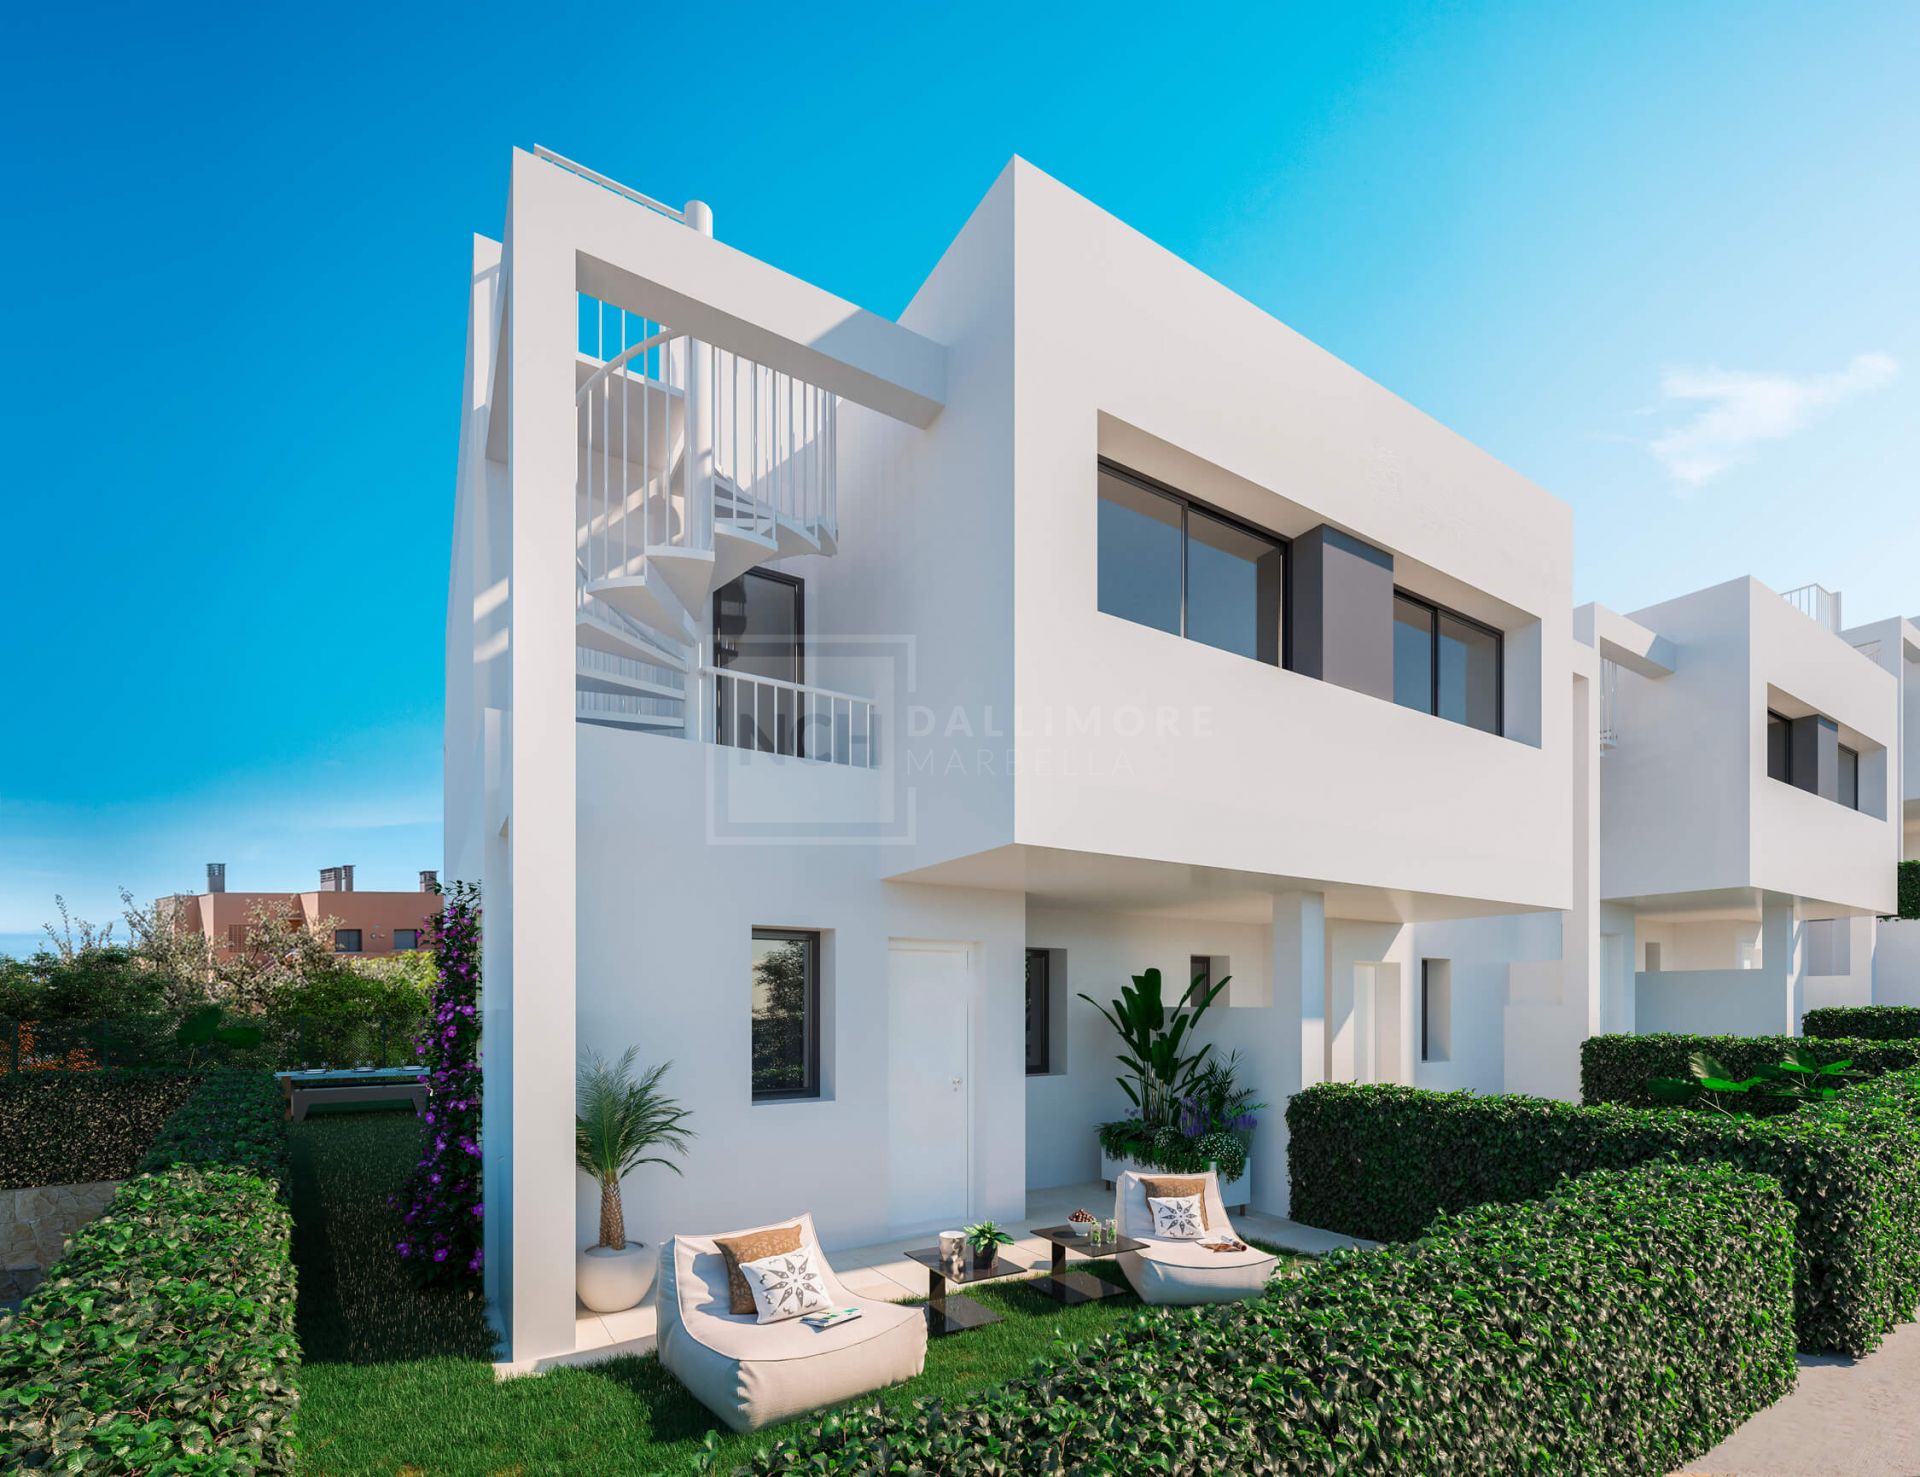 EXCELLENT VALUE BRAND NEW 3-BEDROOM TOWNHOUSE - CLOSE TO SOTOGRANDE